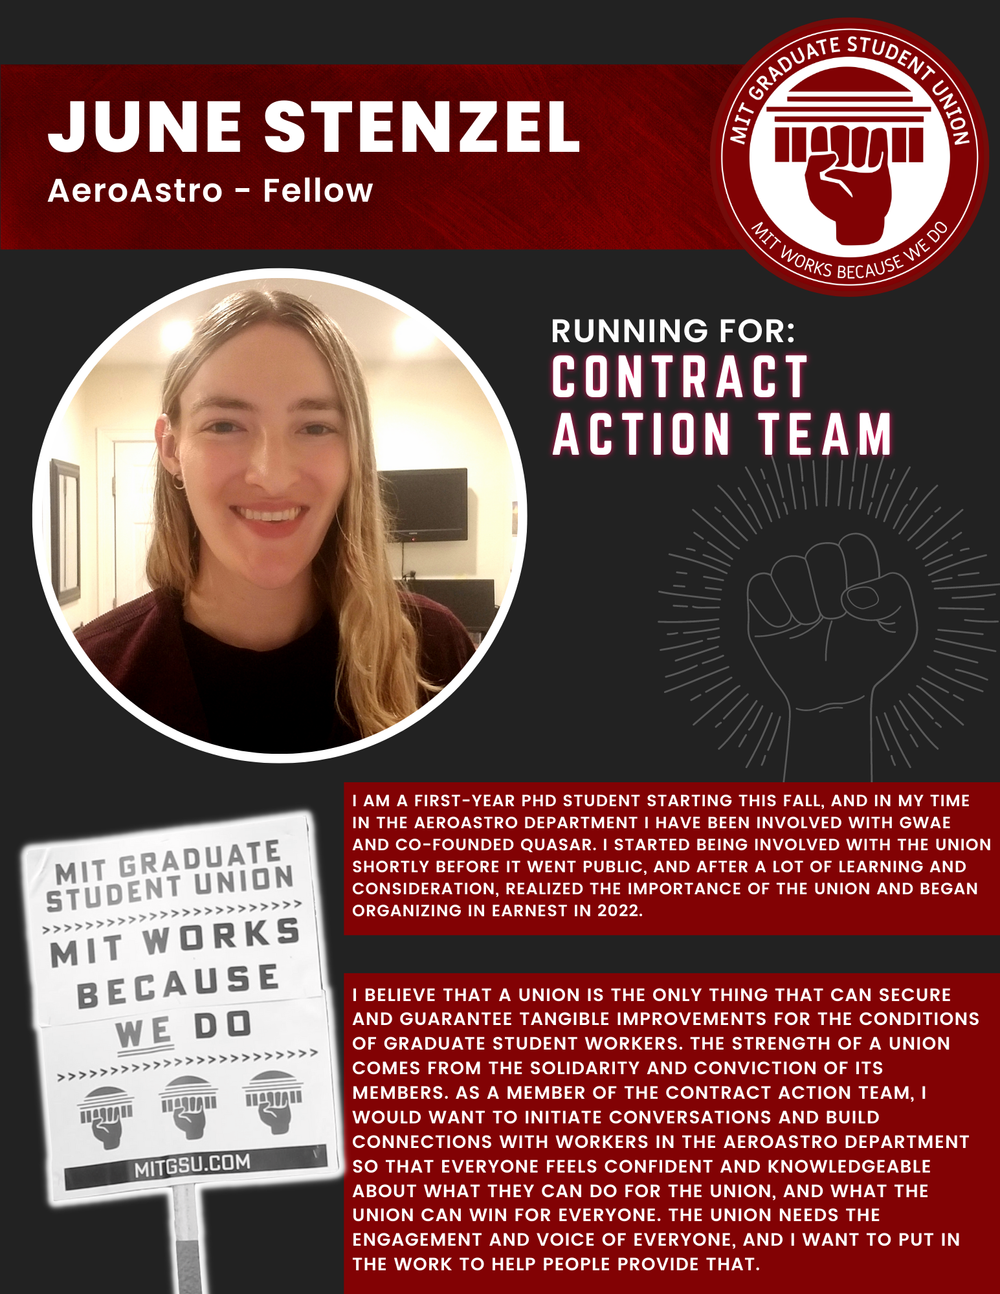  JUNE STENZEL AeroAstro - Fellow   RUNNING FOR: Contract Action Team  I AM A FIRST-YEAR PHD STUDENT STARTING THIS FALL, AND IN MY TIME IN THE AEROASTRO DEPARTMENT I HAVE BEEN INVOLVED WITH GWAE AND CO-FOUNDED QUASAR. I STARTED BEING INVOLVED WITH THE